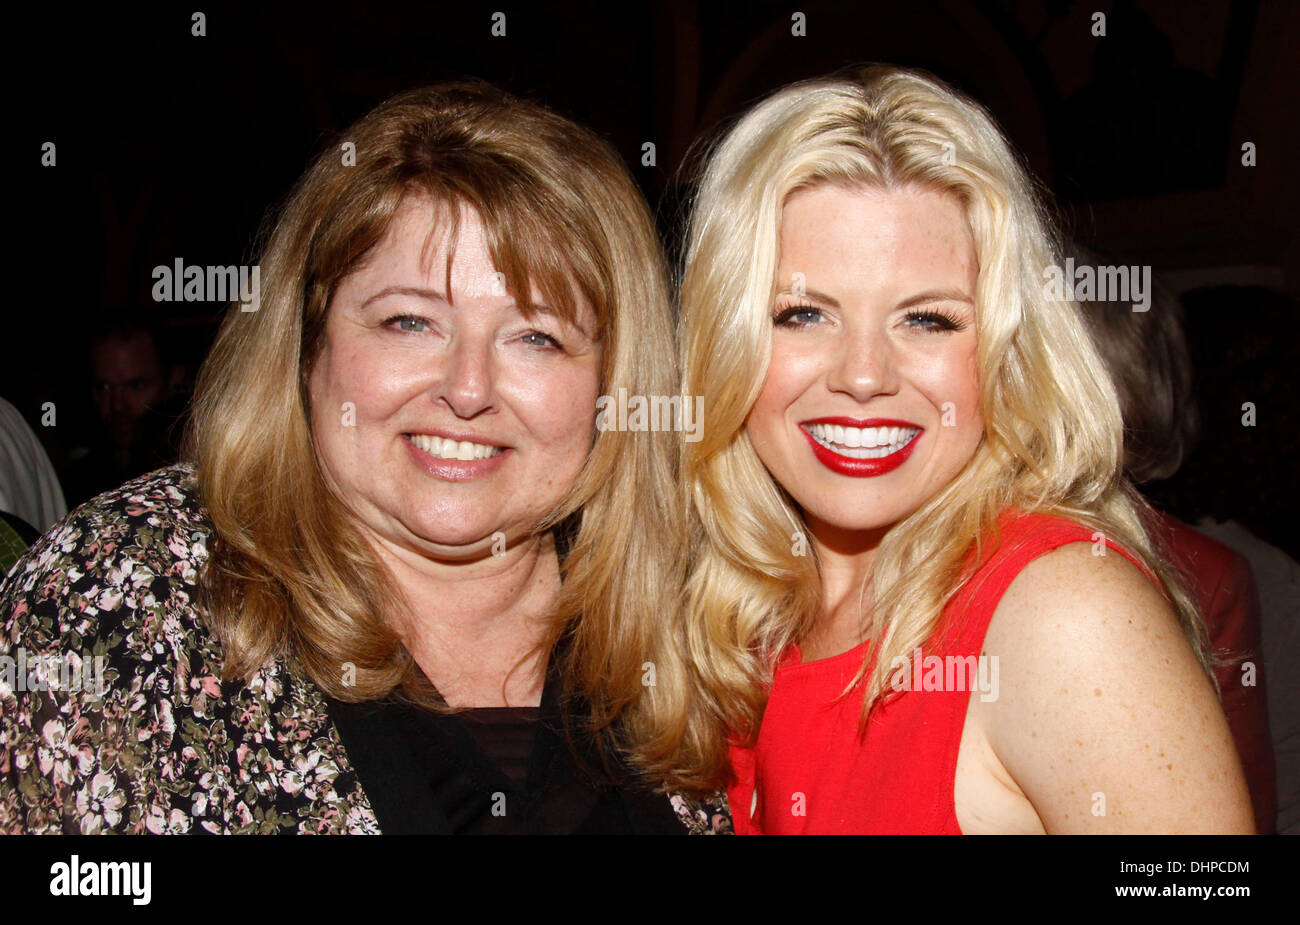 Donna Hilty and her daughter Megan Hilty  Closing night reception for the Encores! concert of 'Gentlemen Prefer Blondes' held at New York City Center New York City, USA - 13.05.12 Stock Photo